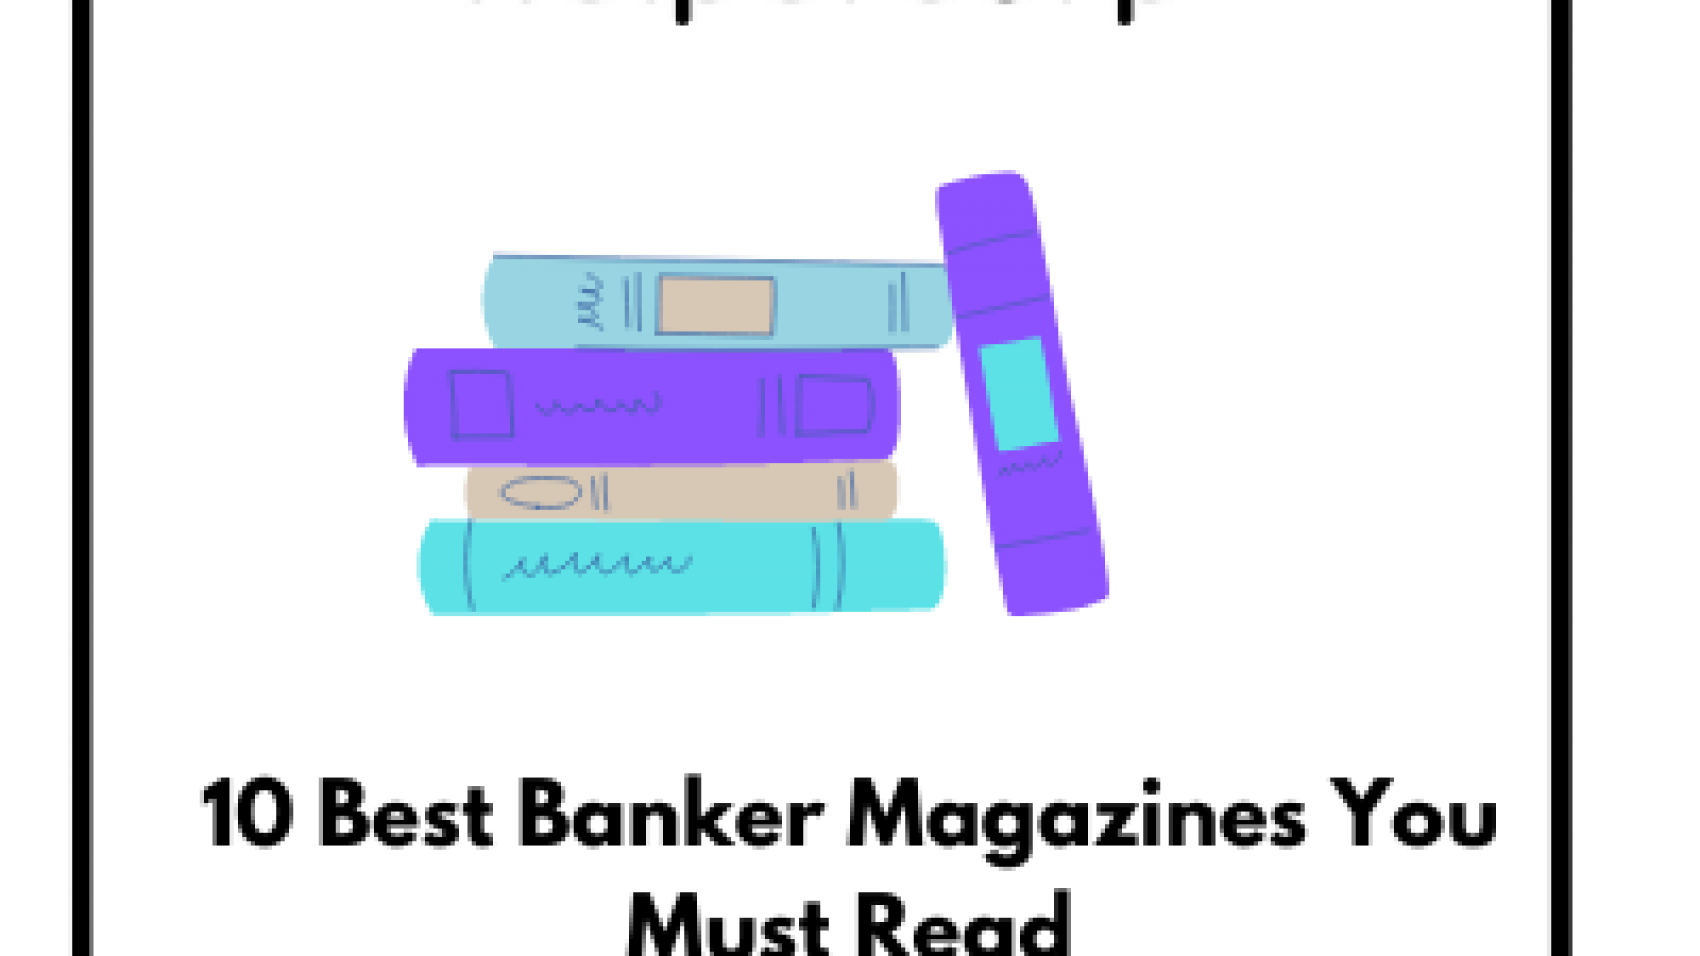 10 Best Banker Magazines You Must Read